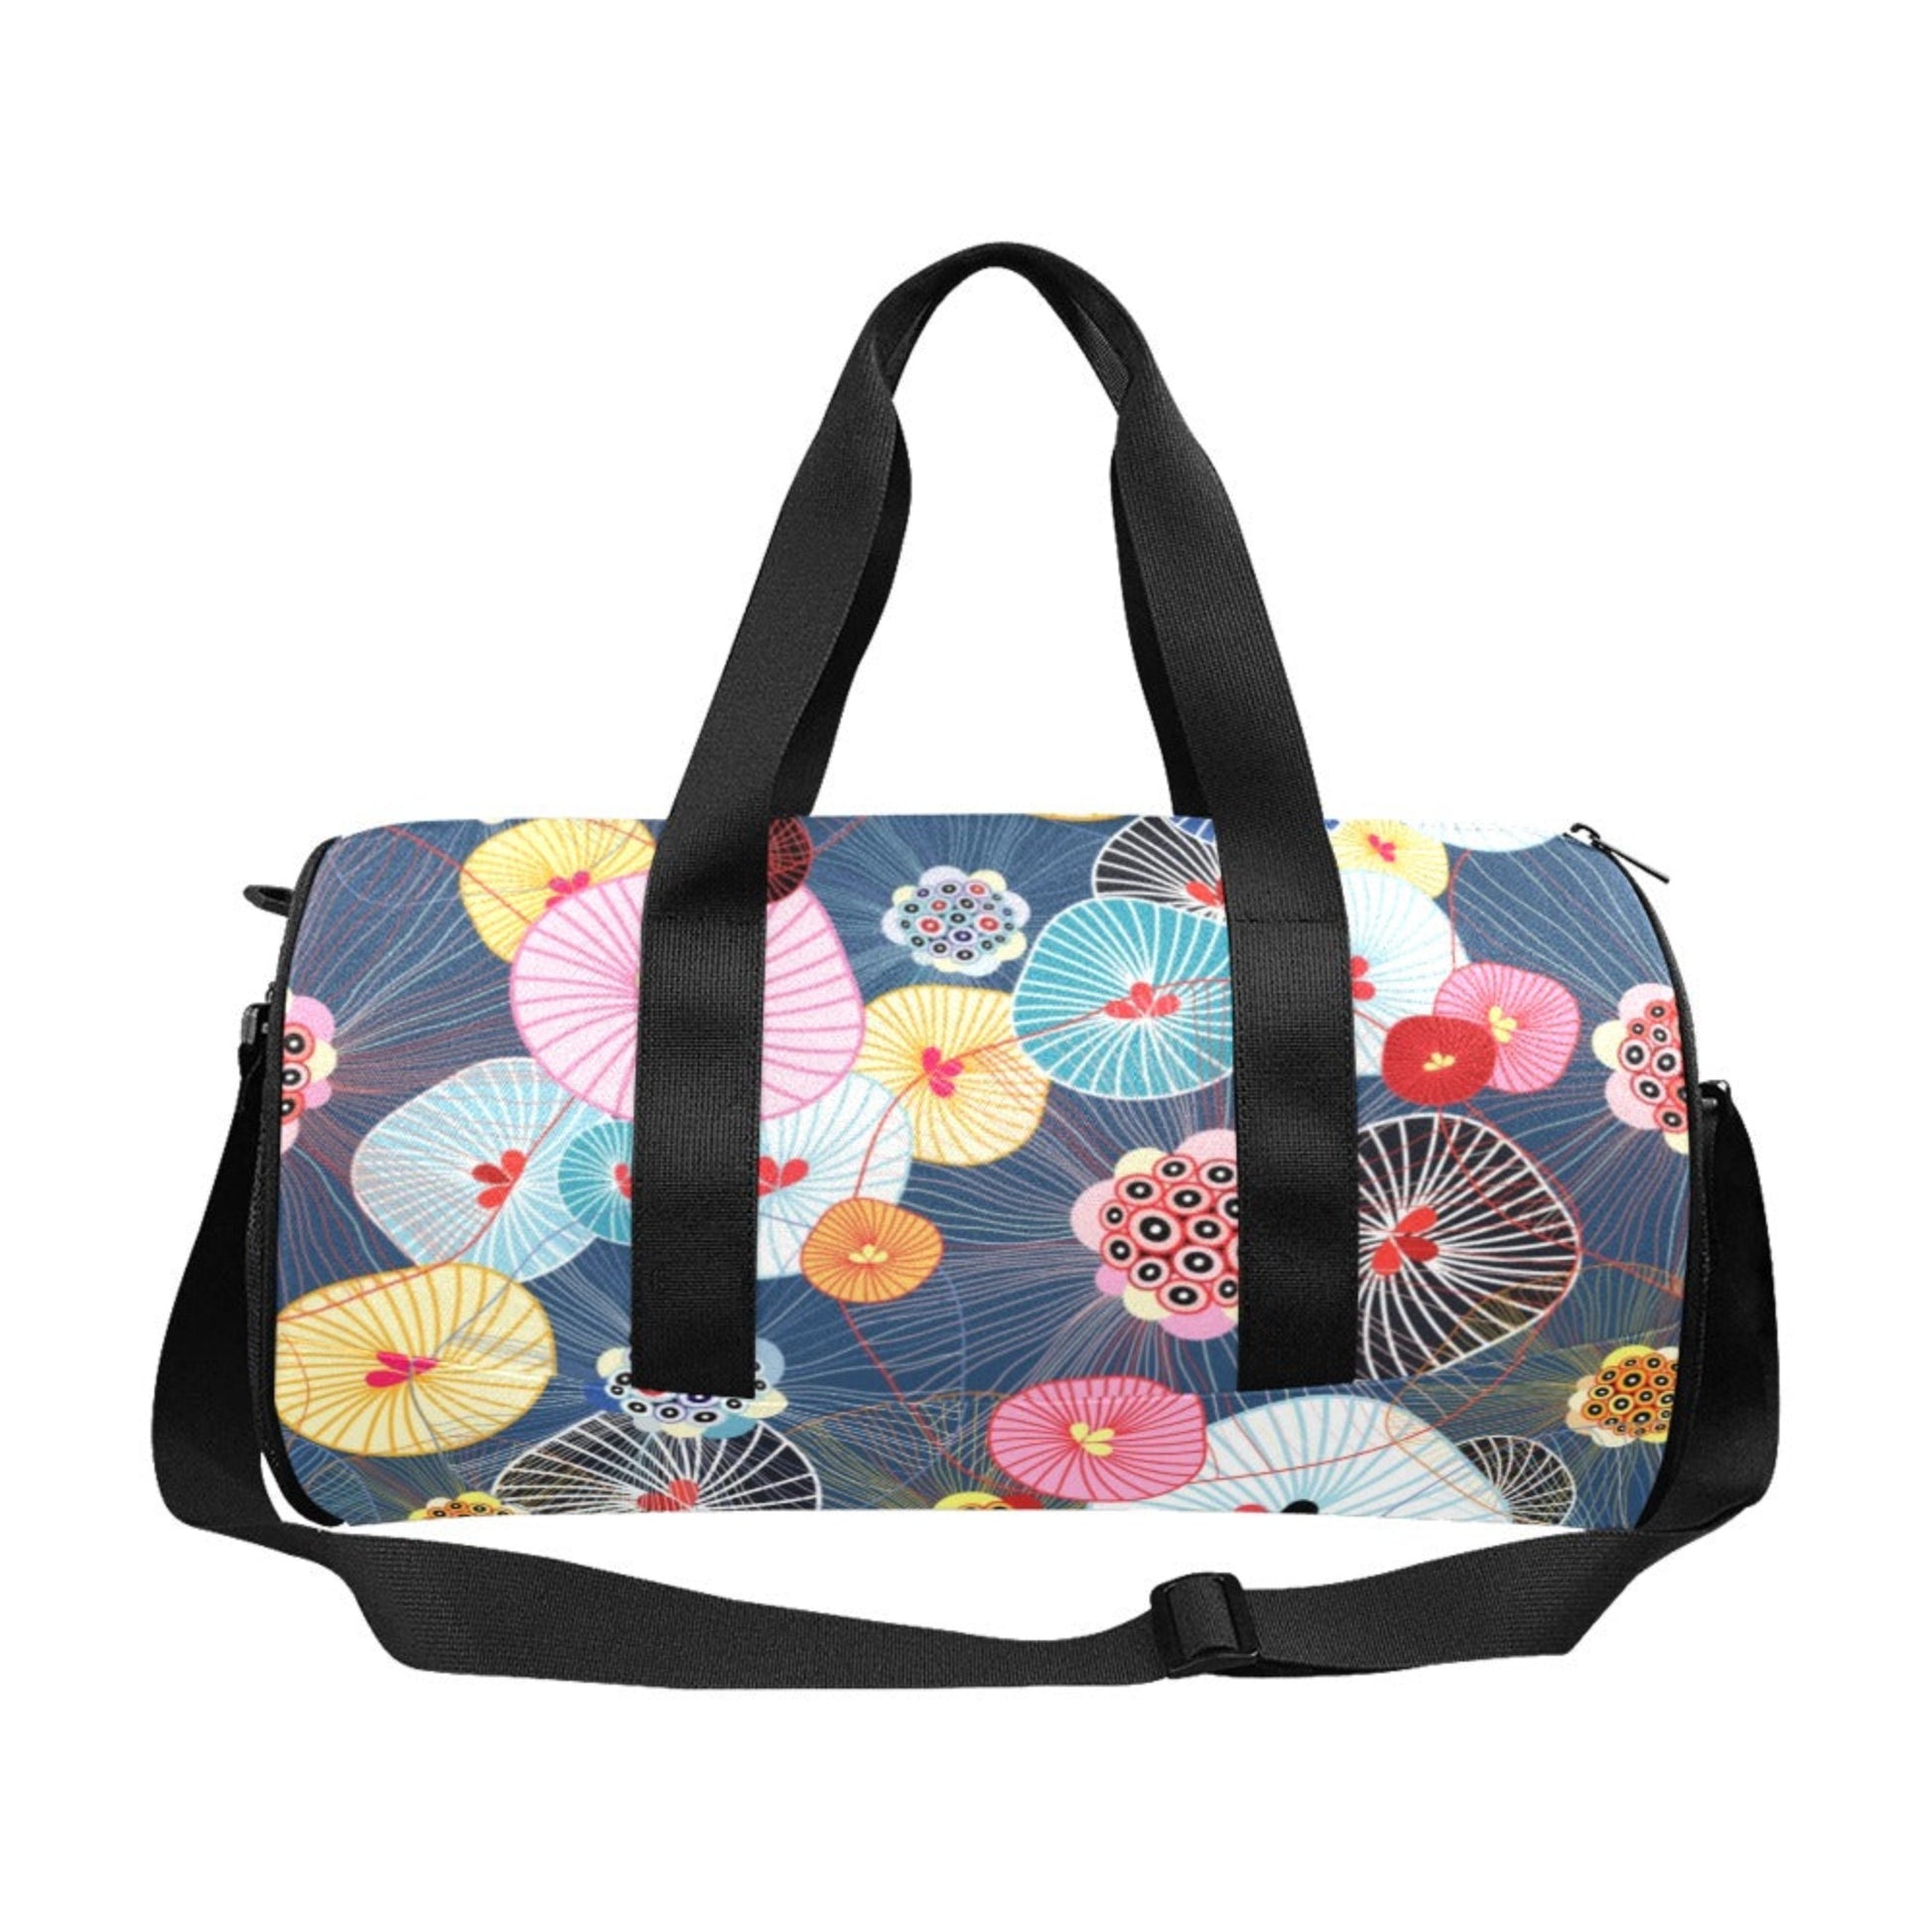 Abstract Floral - Round Duffle Bag Round Duffle Bag